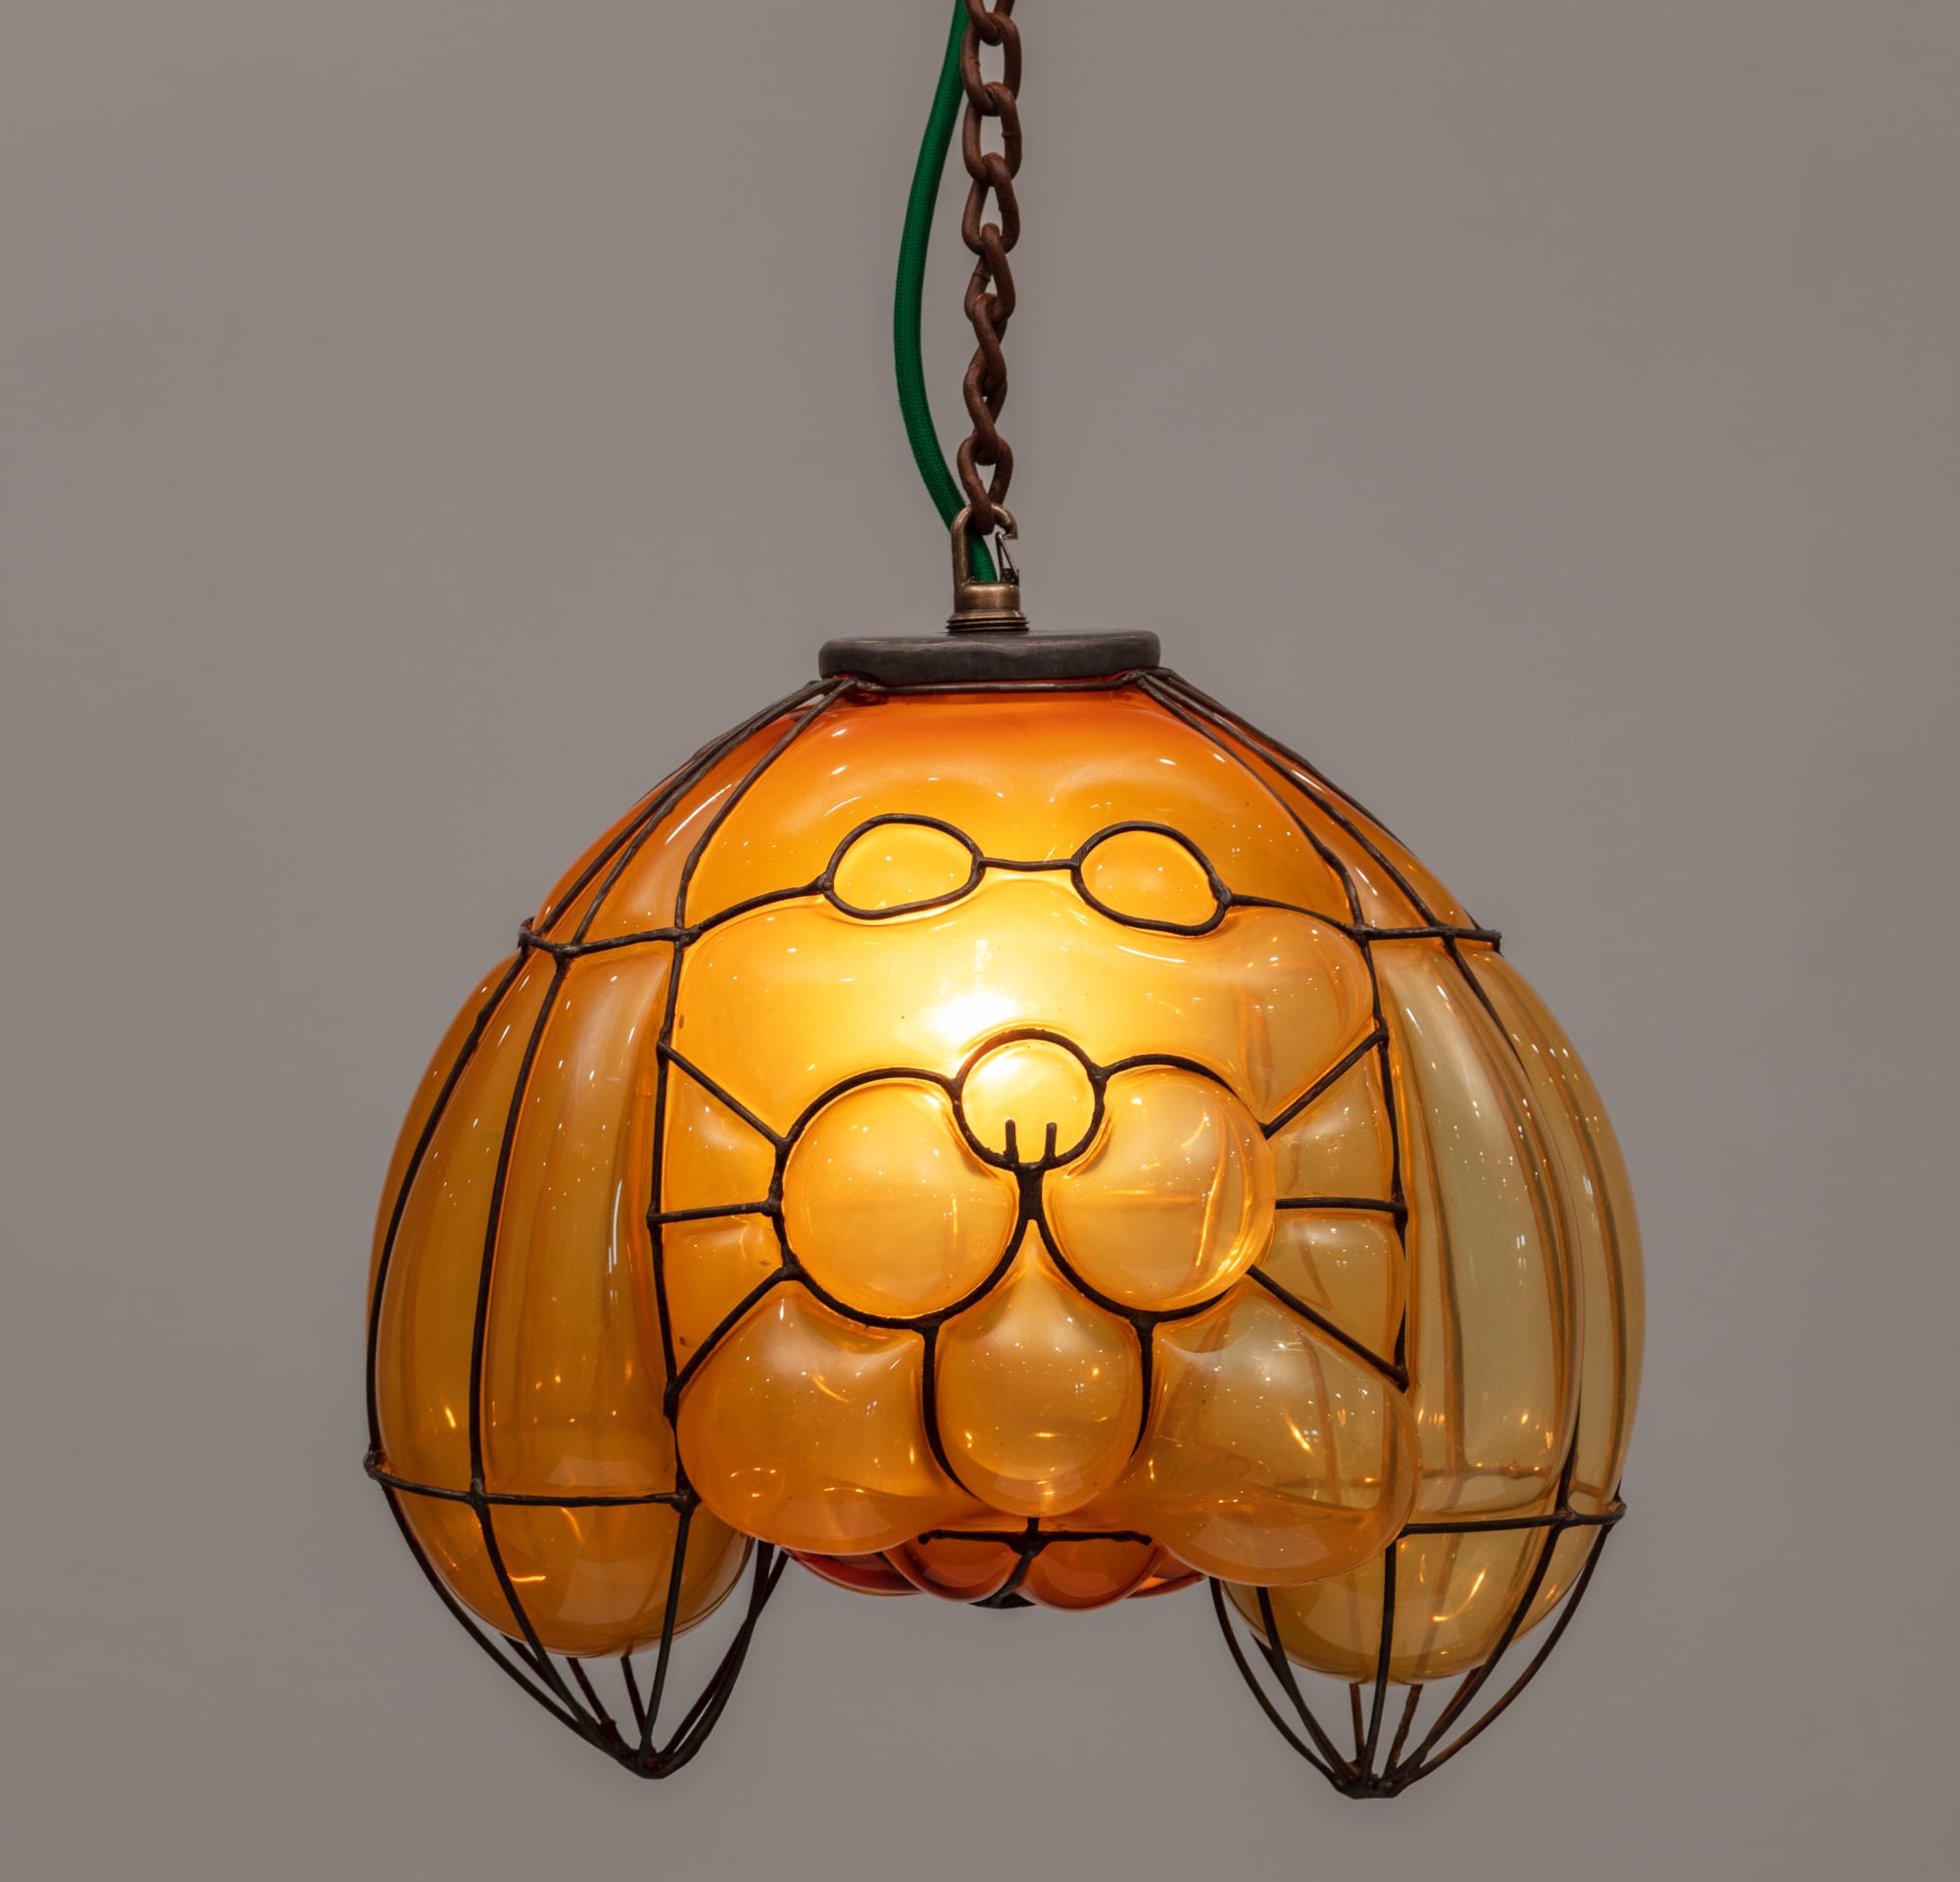 a glass blown pendant lamp hanging from a chain that bubbles inside steel armature and appears like a yellow insect